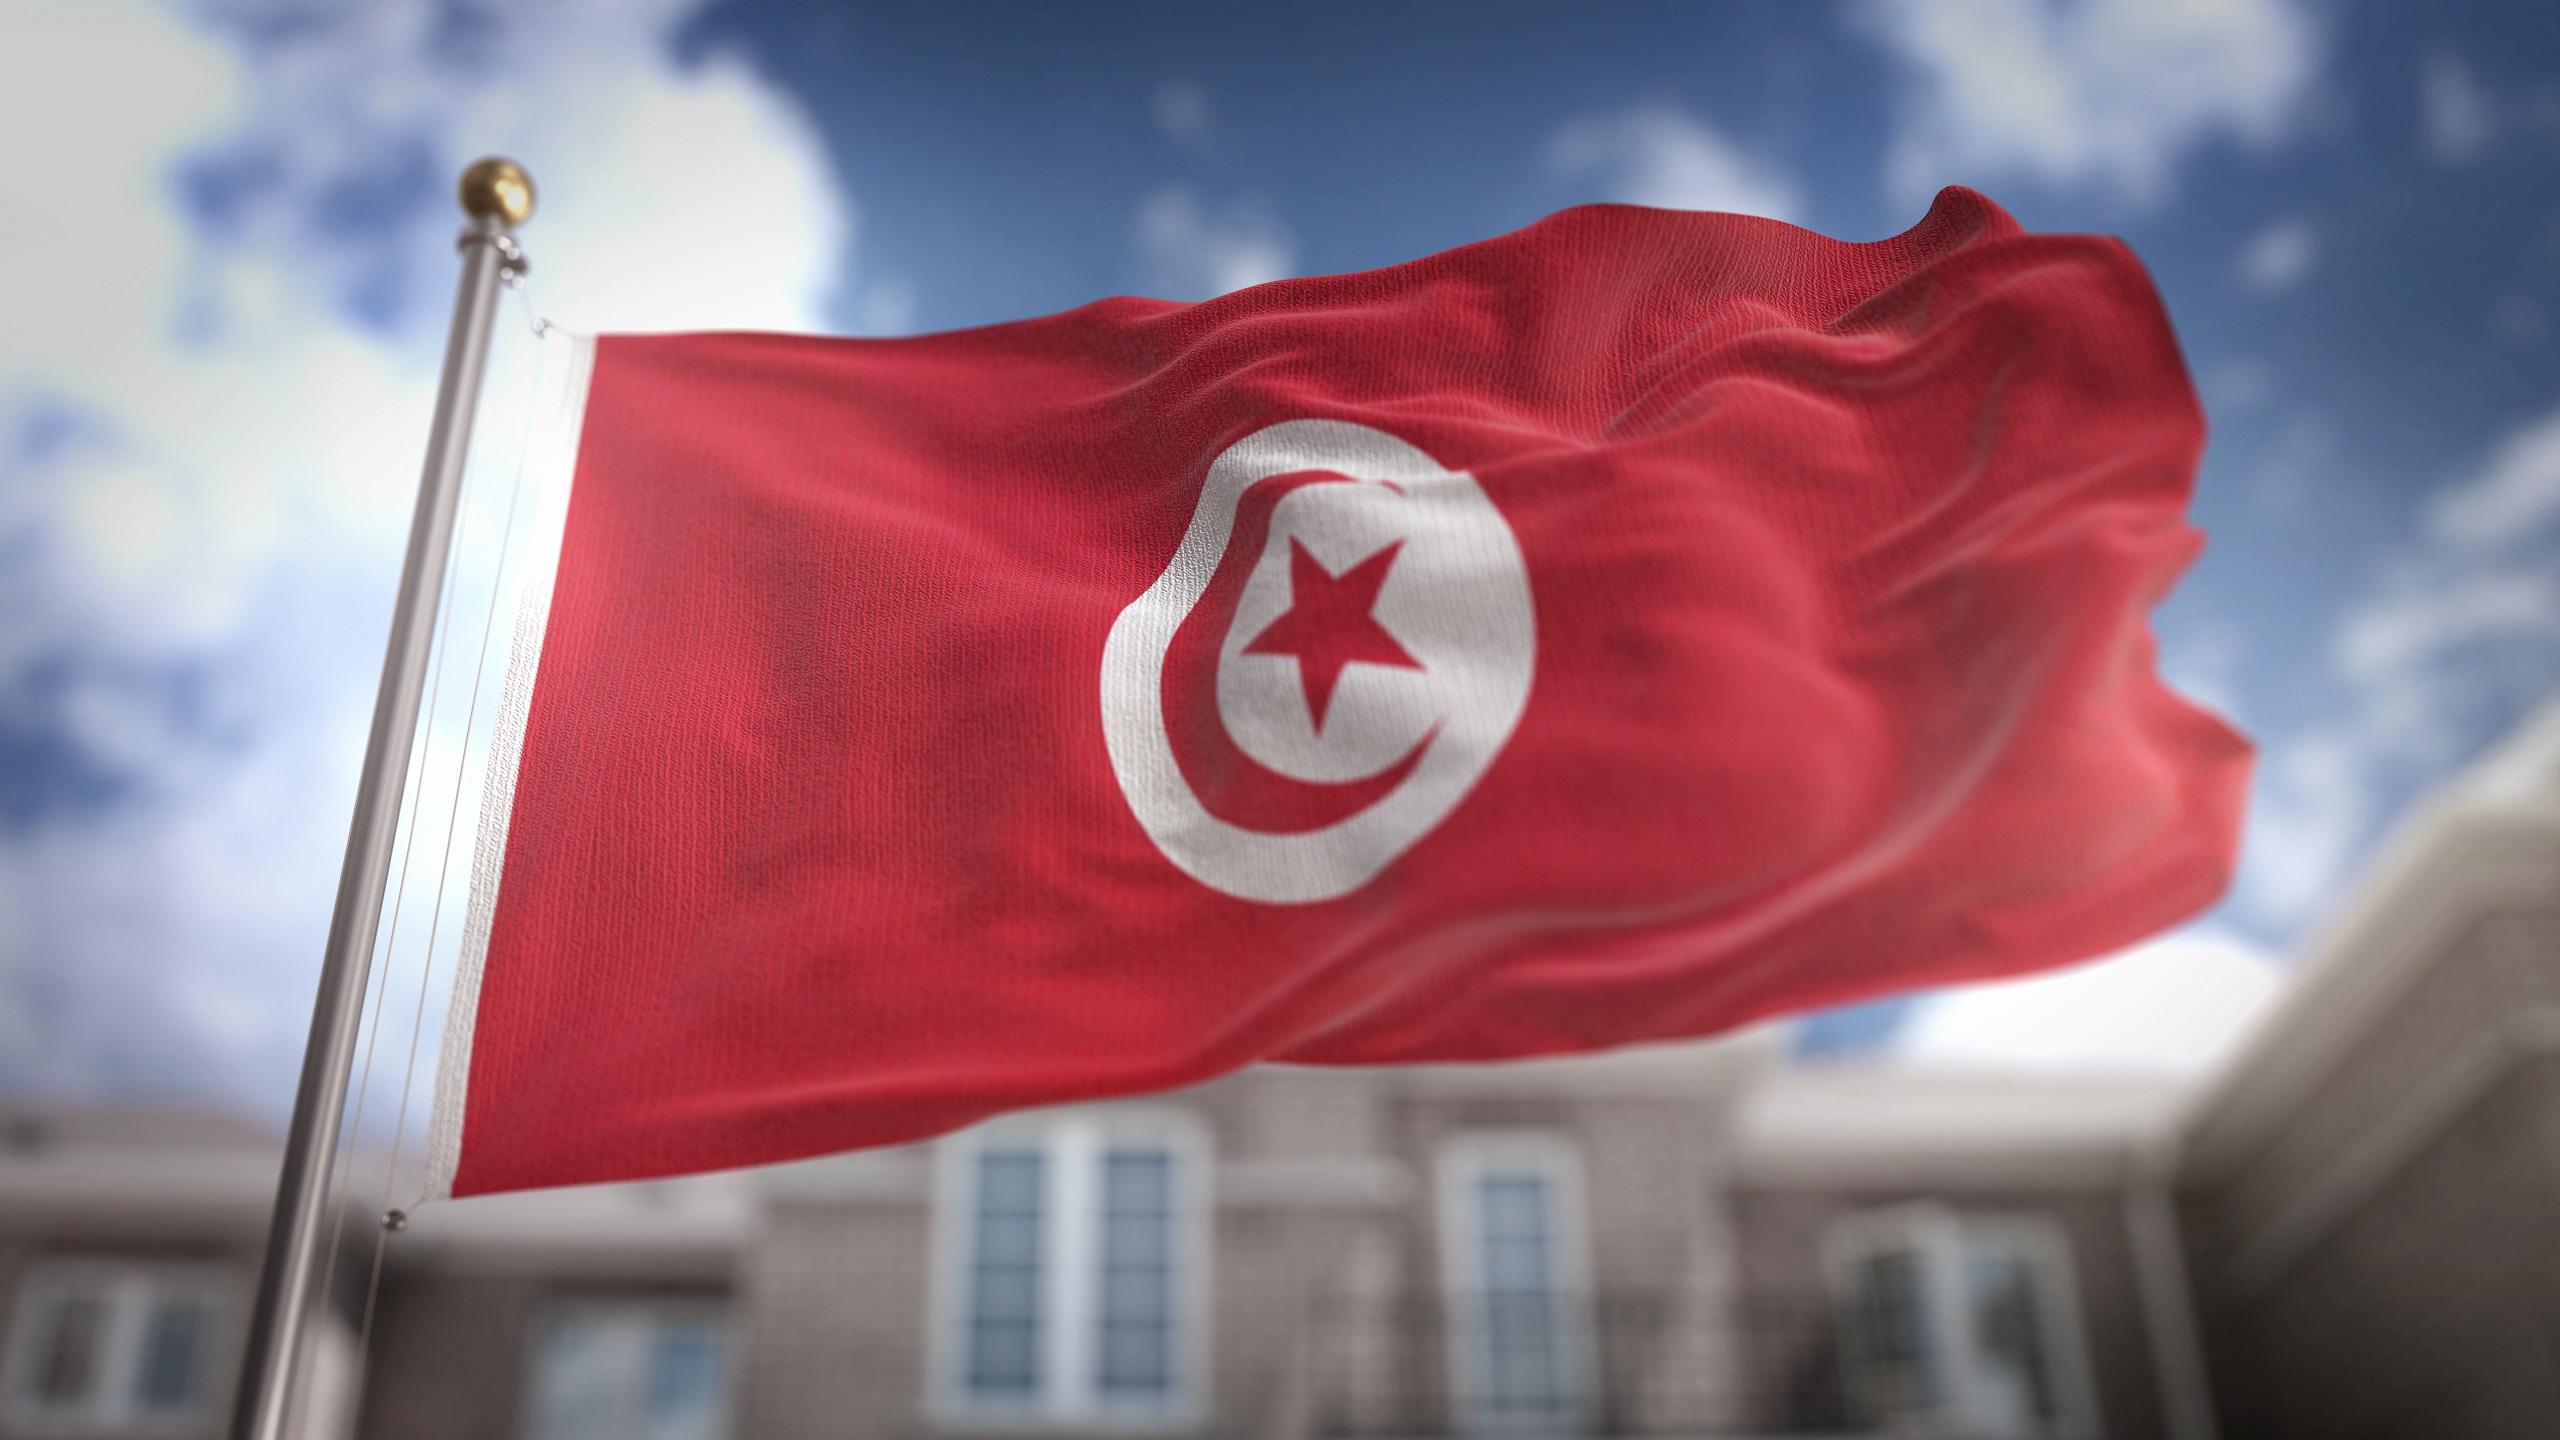 What’s Next for Tunisia?